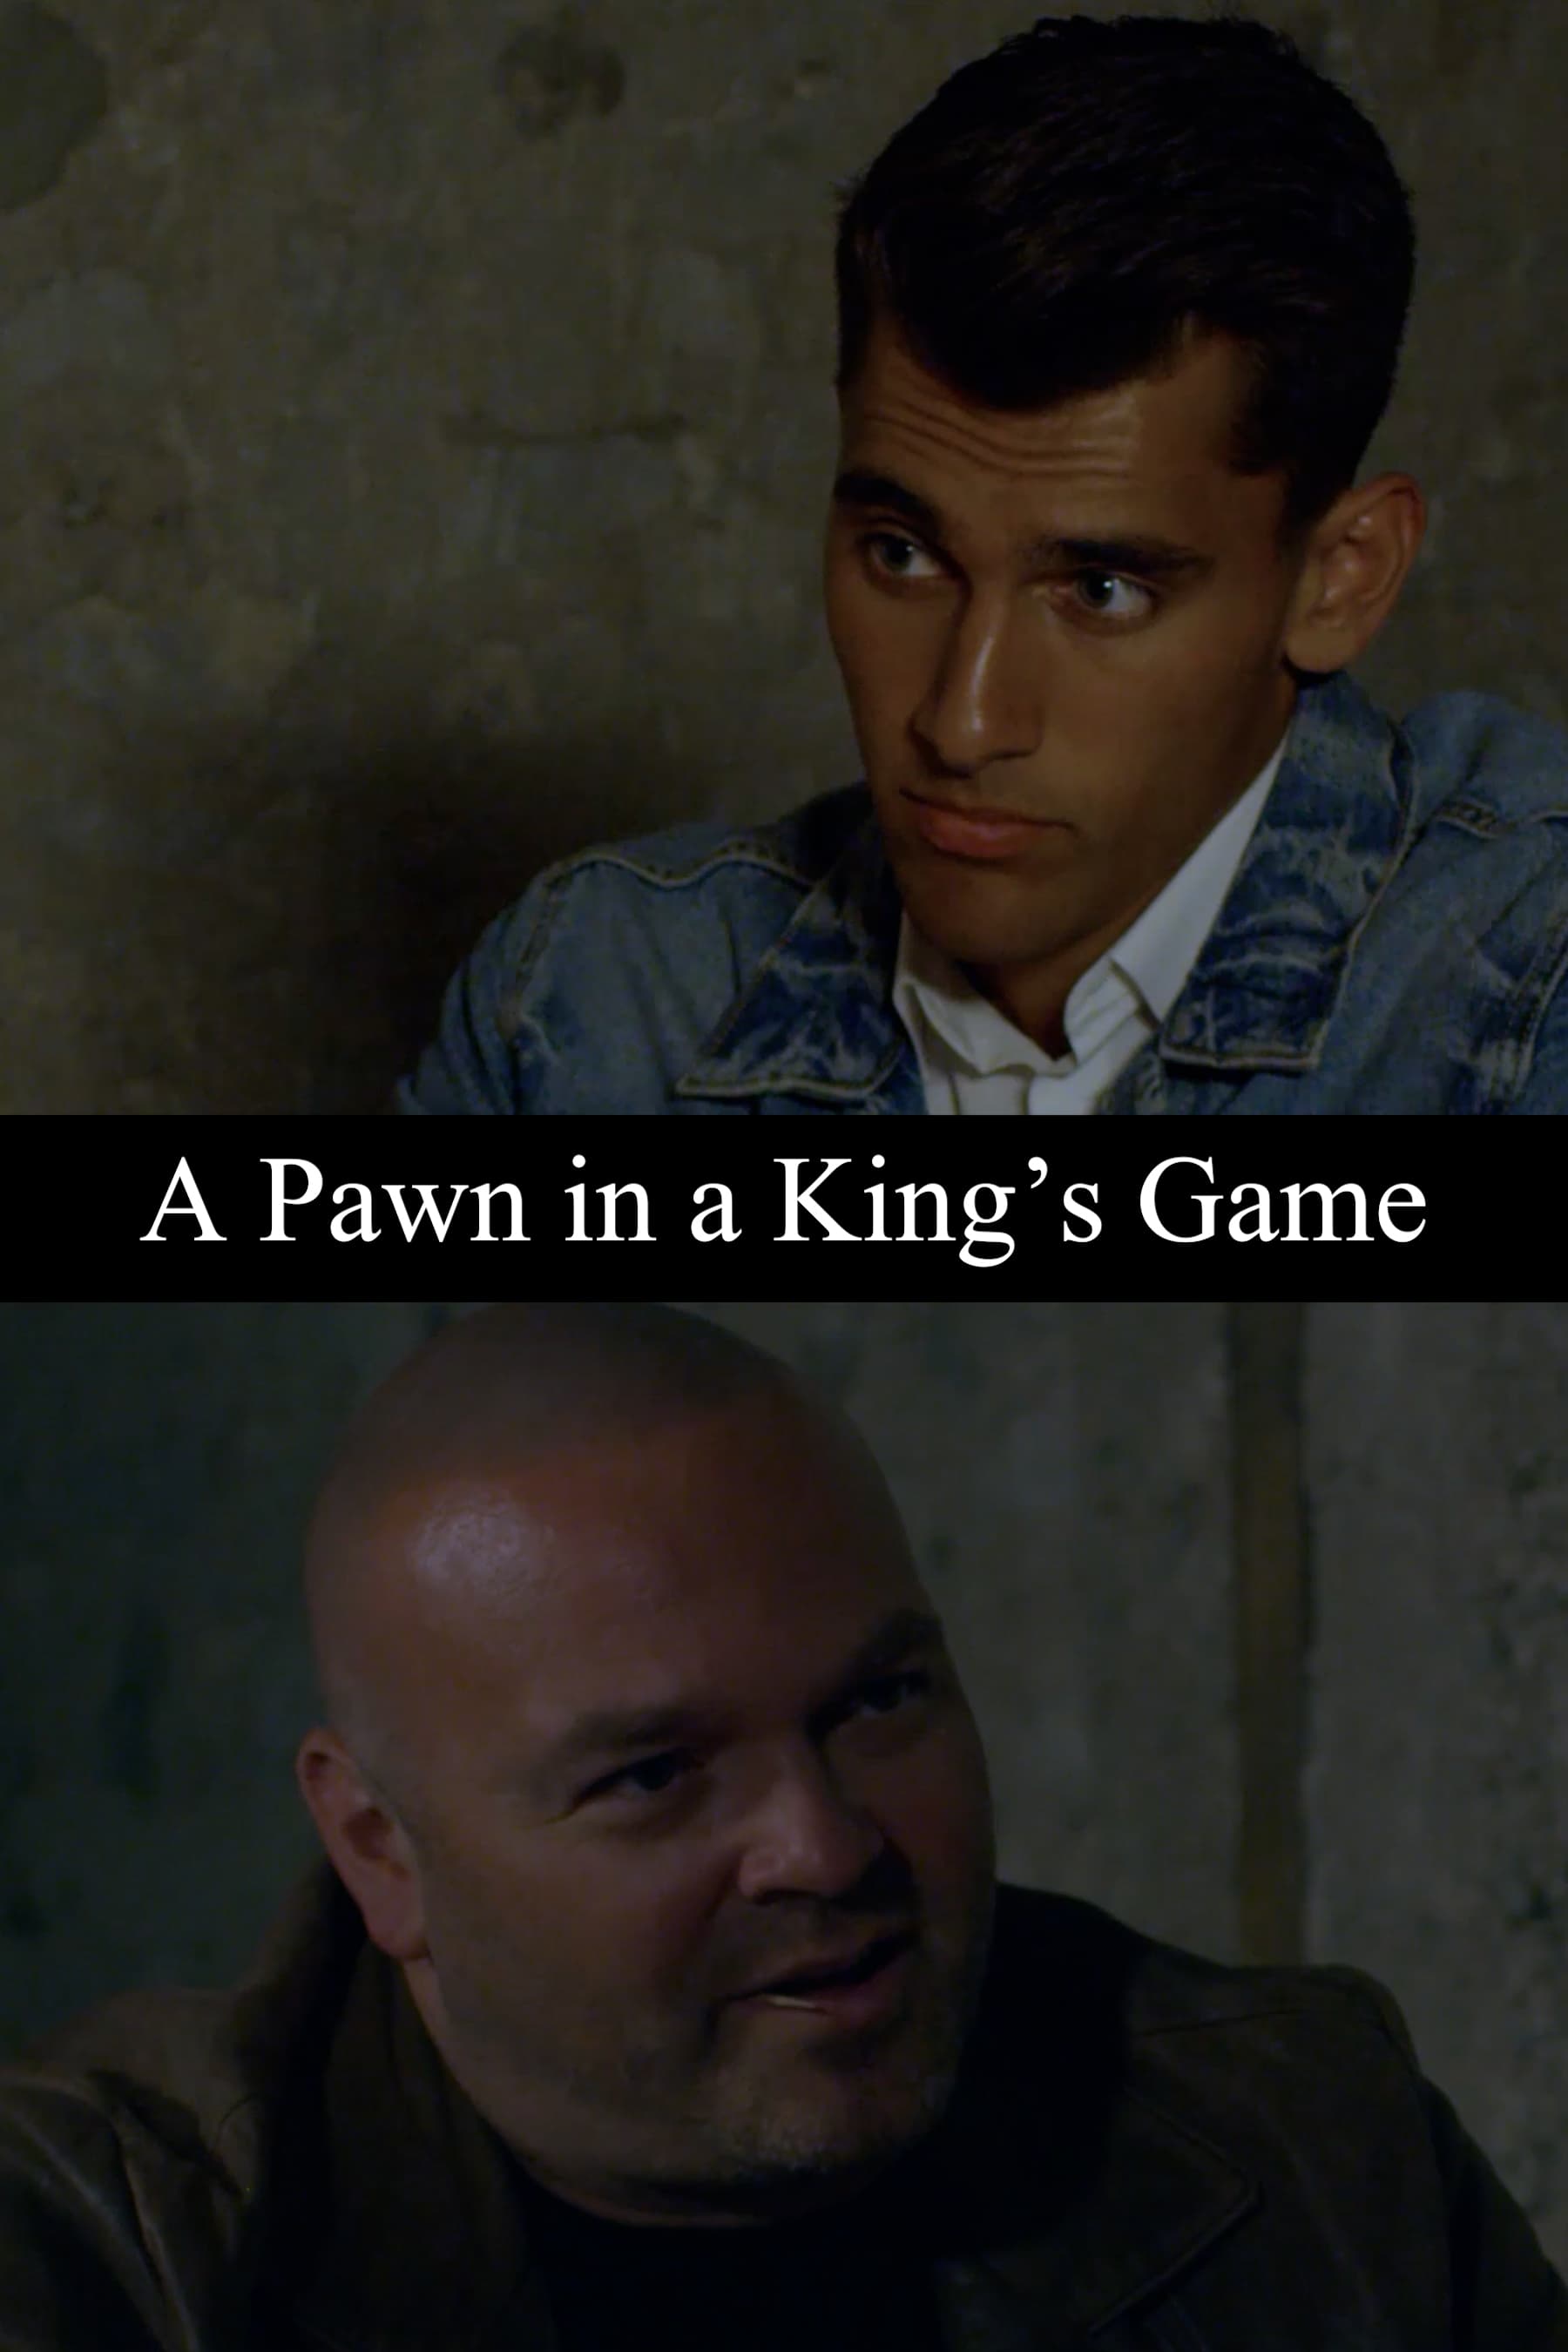 A Pawn in a King's Game